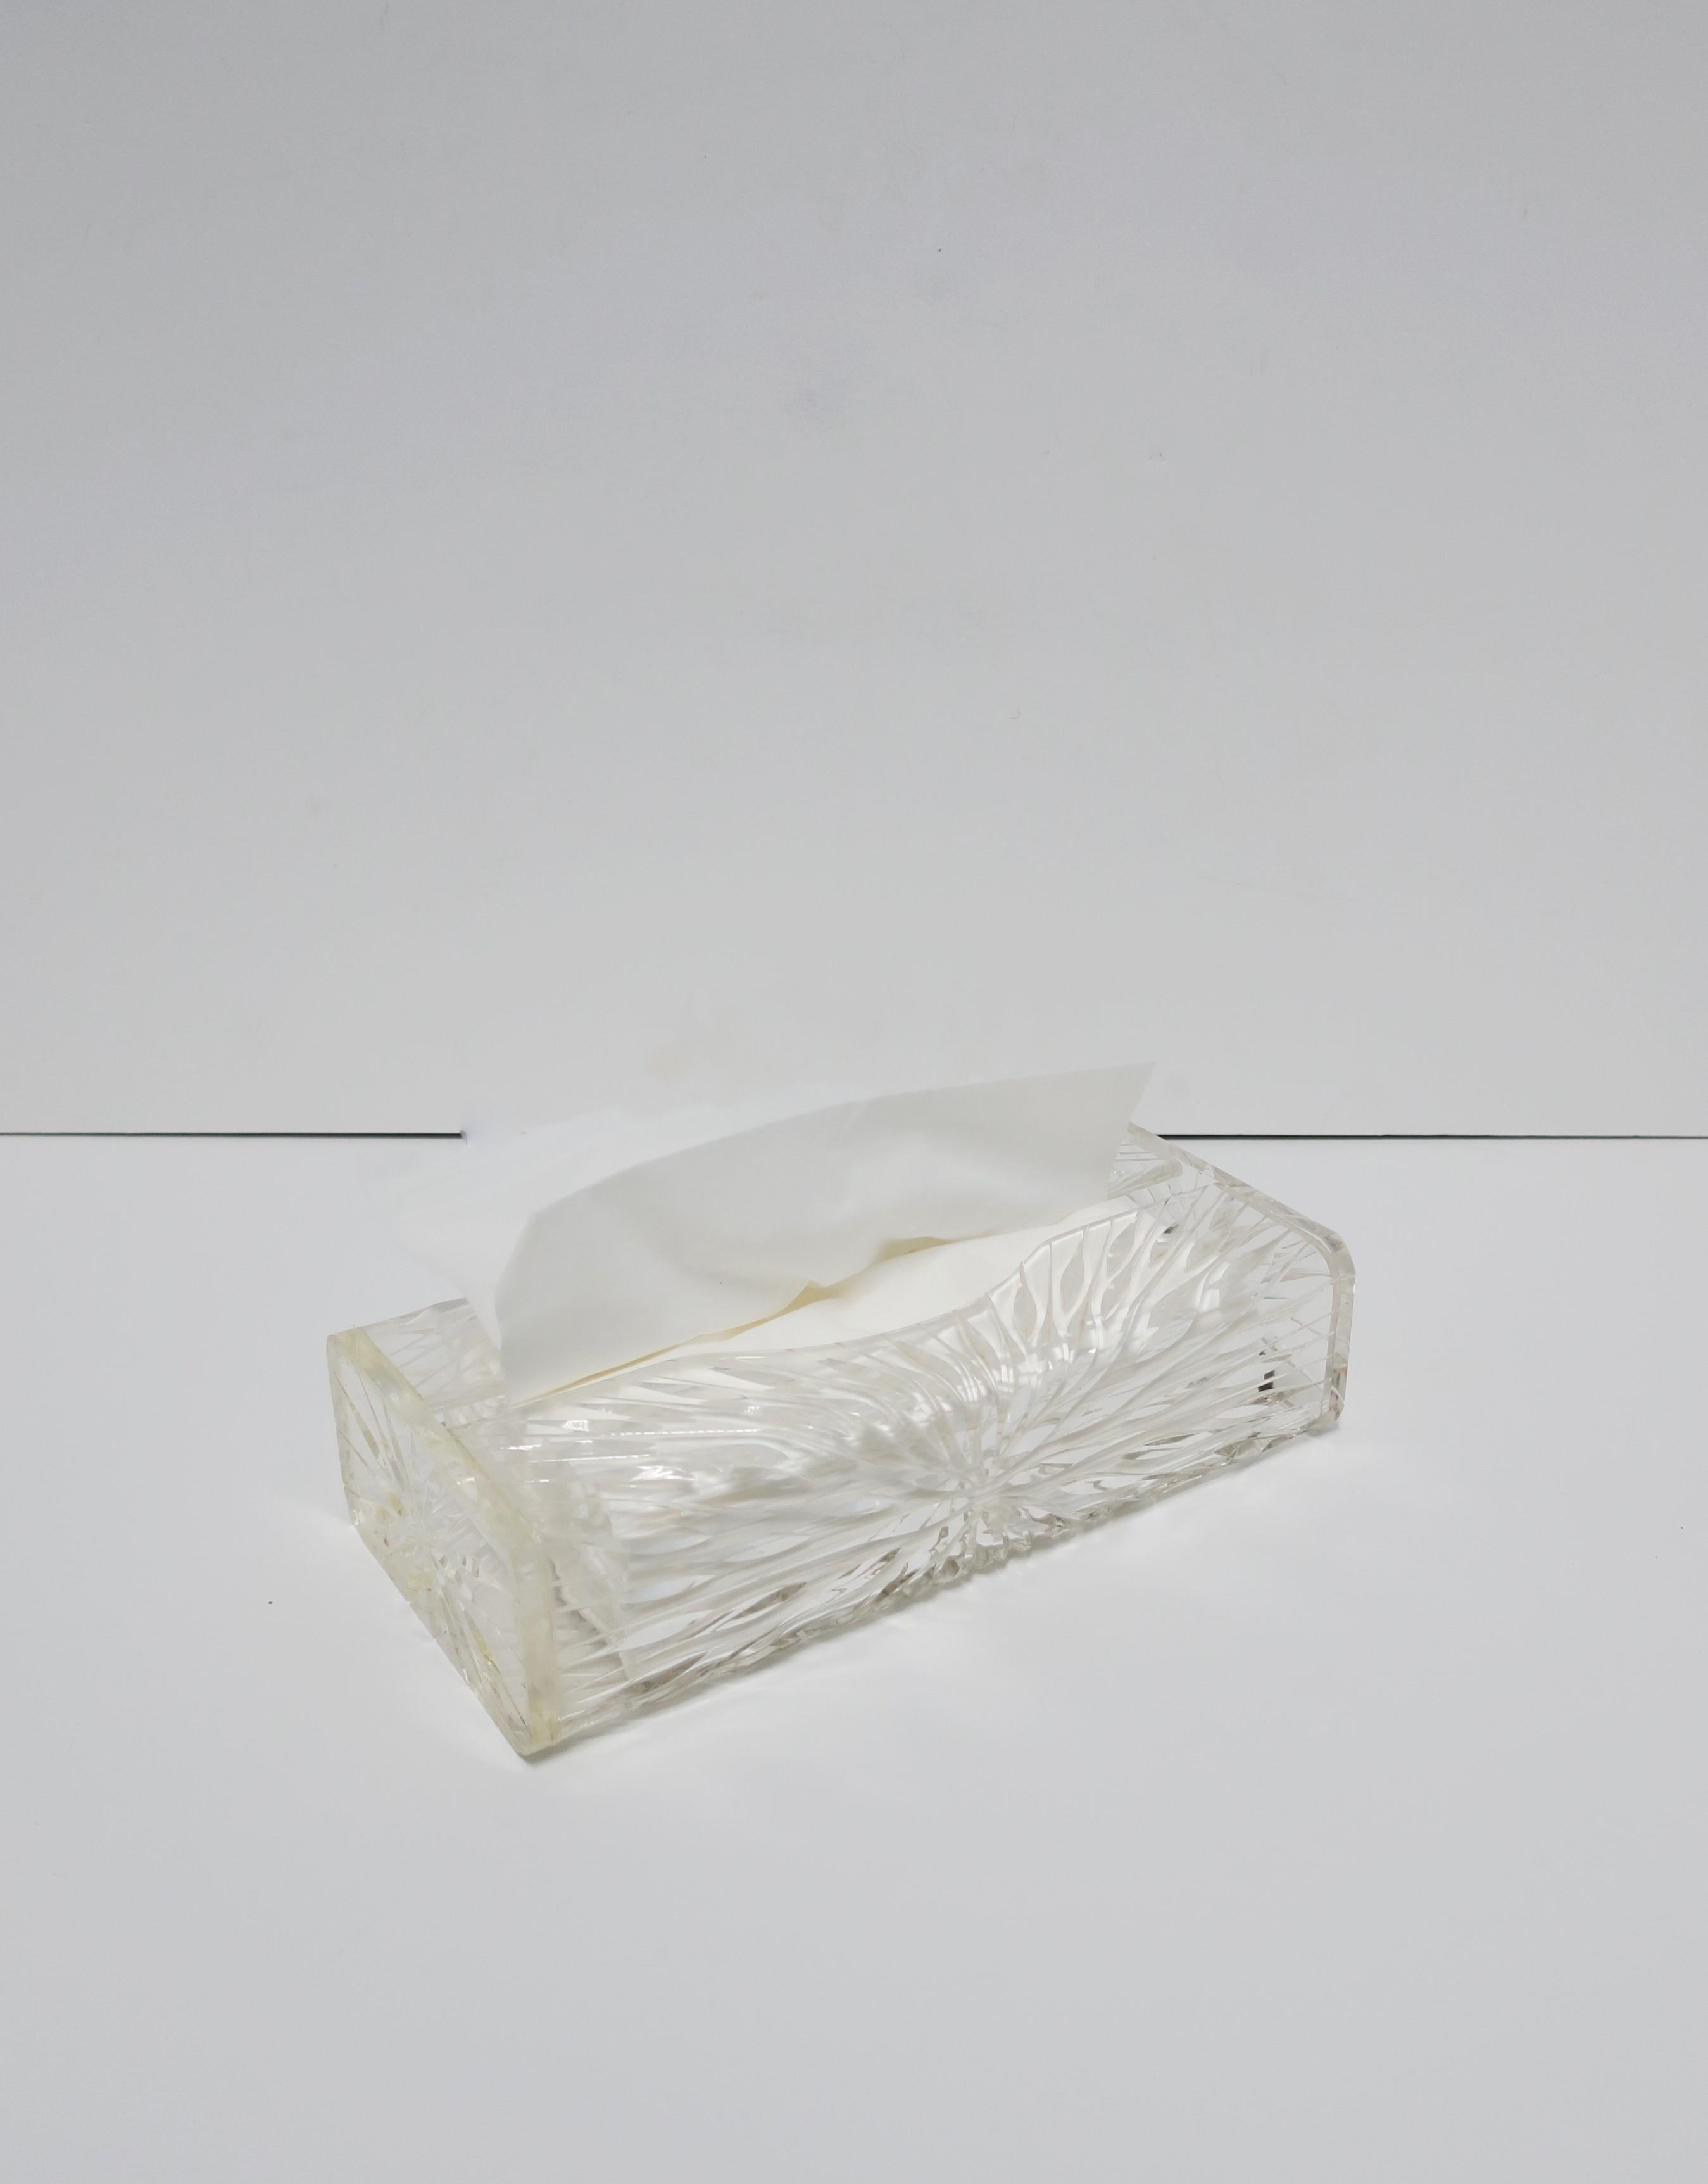 American Lucite Tissue Box Cover Holder by Wilardy For Sale